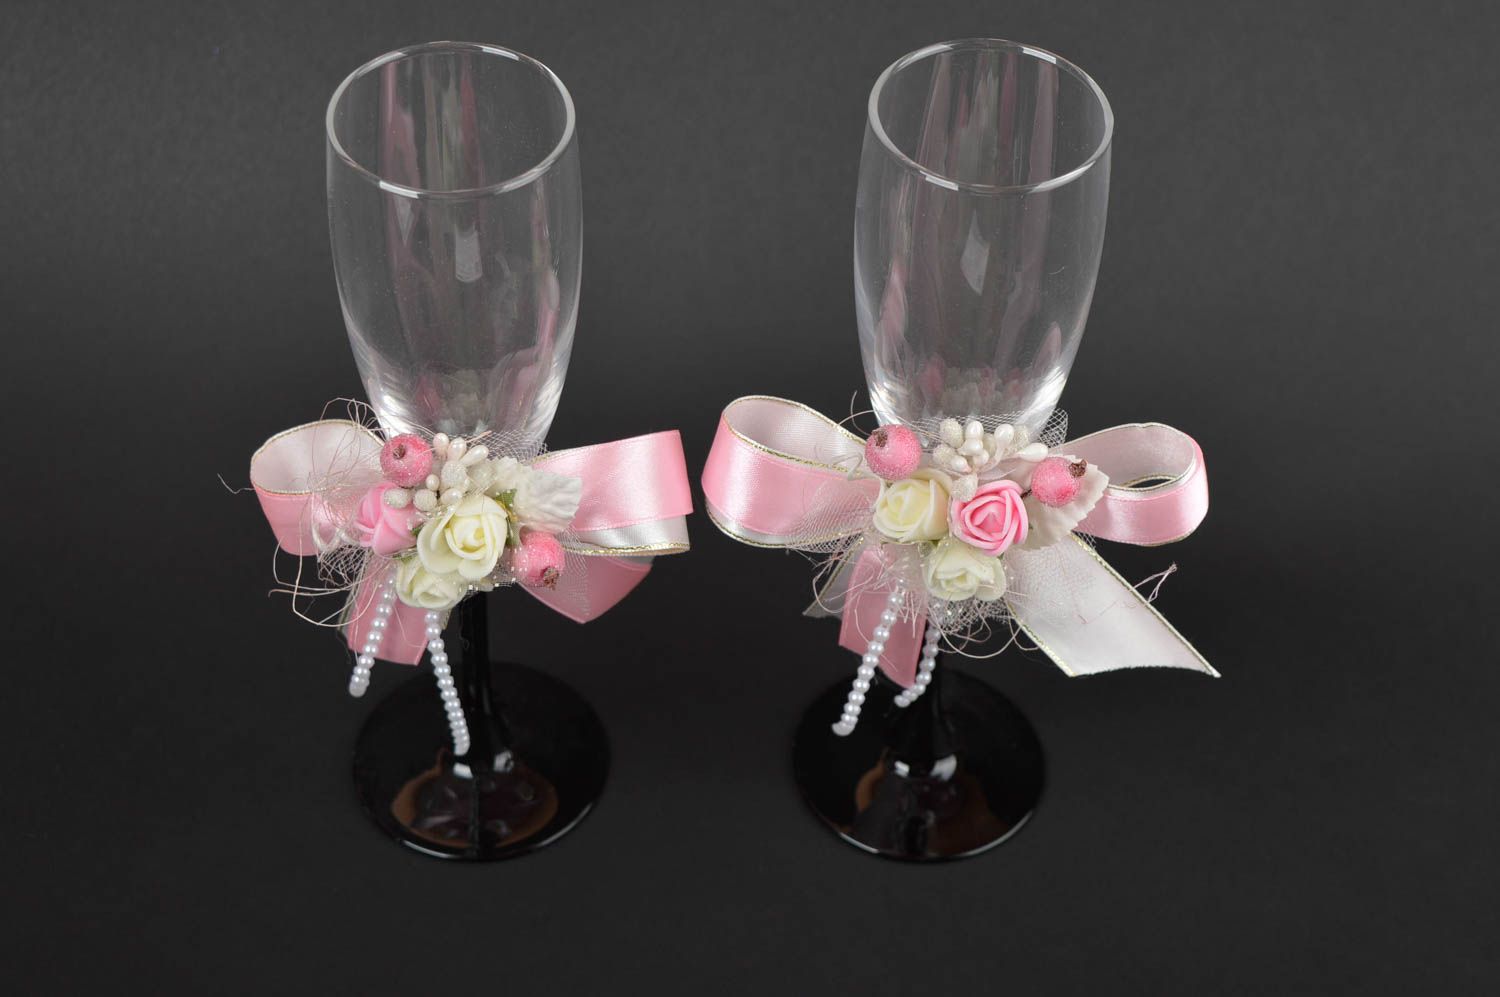 Handmade glasses for wedding champagne glasses for wedding accessories photo 3